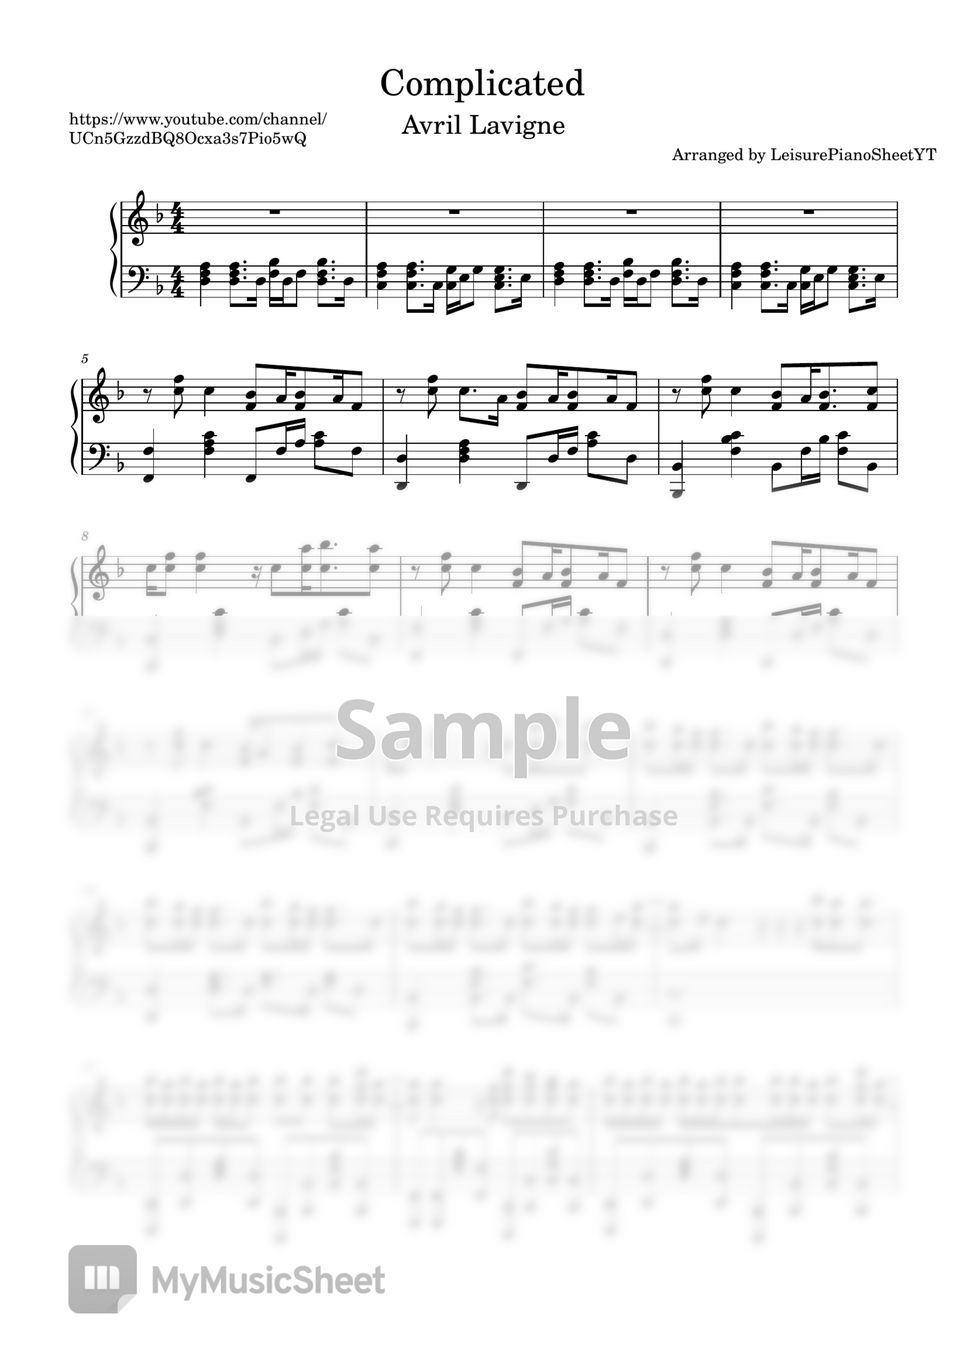 Avril Lavigne - Complicated by Leisure Piano Sheet YT